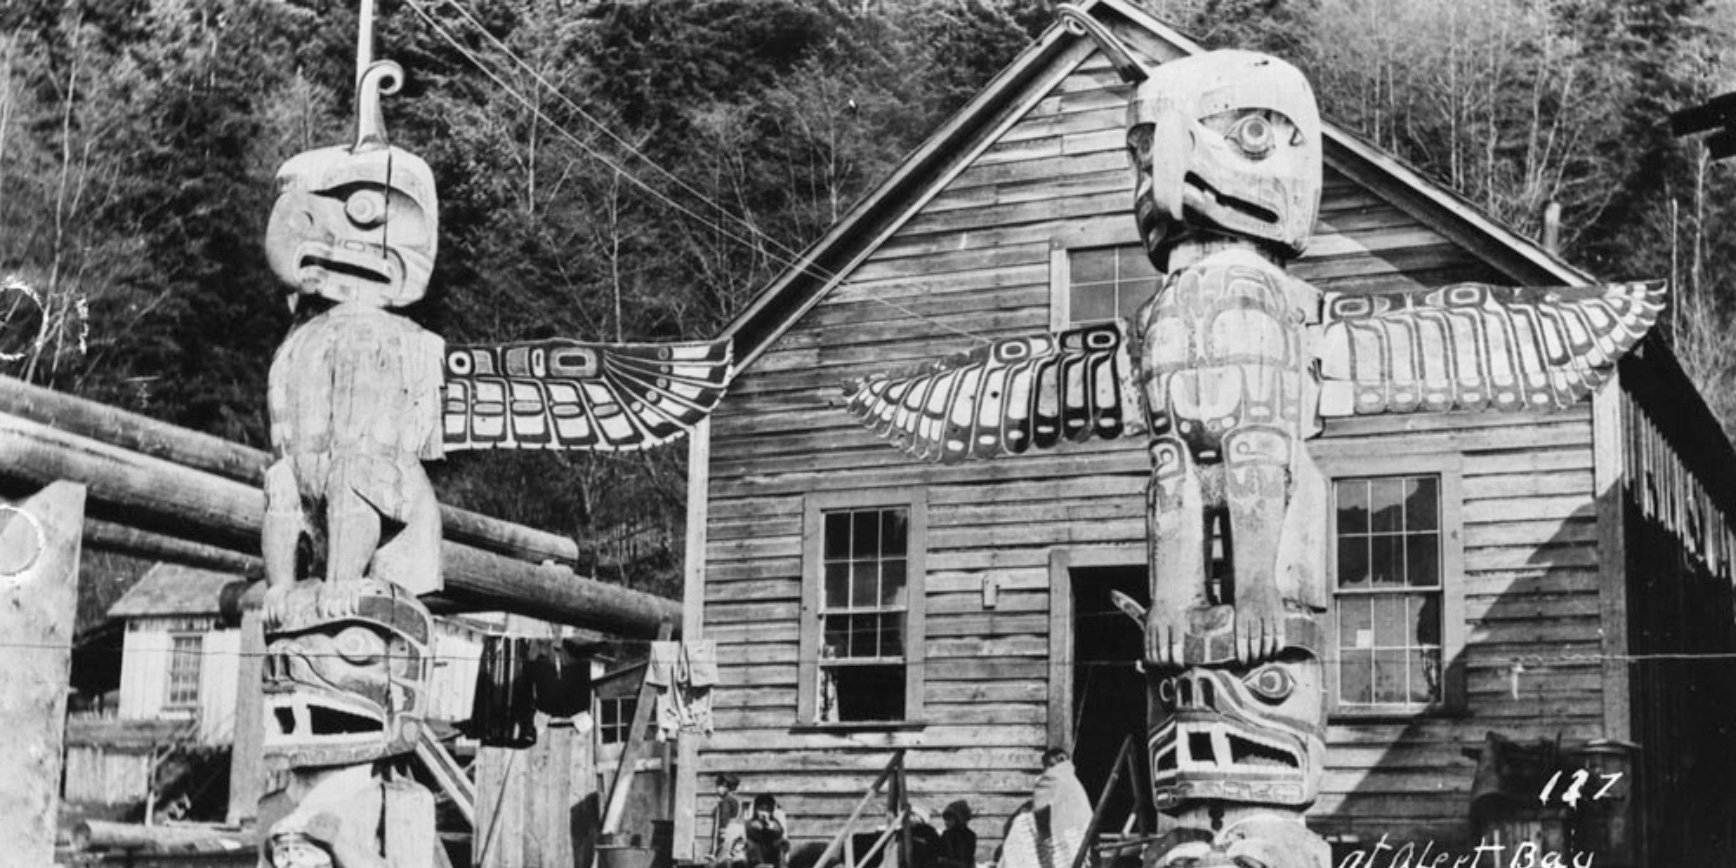 Totem poles at Alert Bay, B.C, 1920. Photo: Jack R. Wrathall / Library and Archives Canada / PA-095510